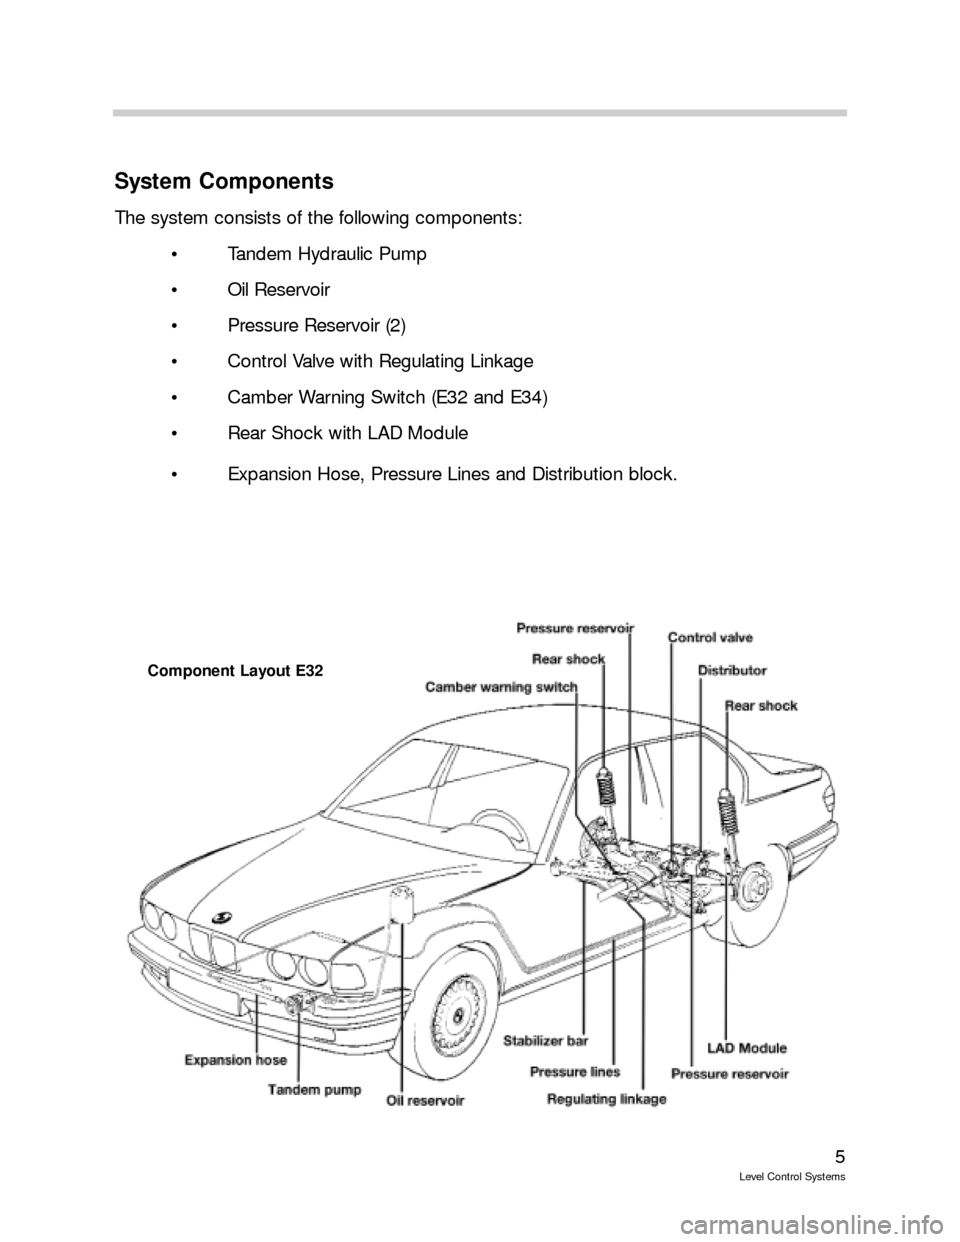 BMW 750IL 1991 E32 Level Control System Manual 5
Level Control Systems
System Components
The system consists of the following components:
 Tandem Hydraulic Pump
 Oil Reservoir
 Pressure Reservoir (2)
 Control Valve with Regulating Linkage
 Ca